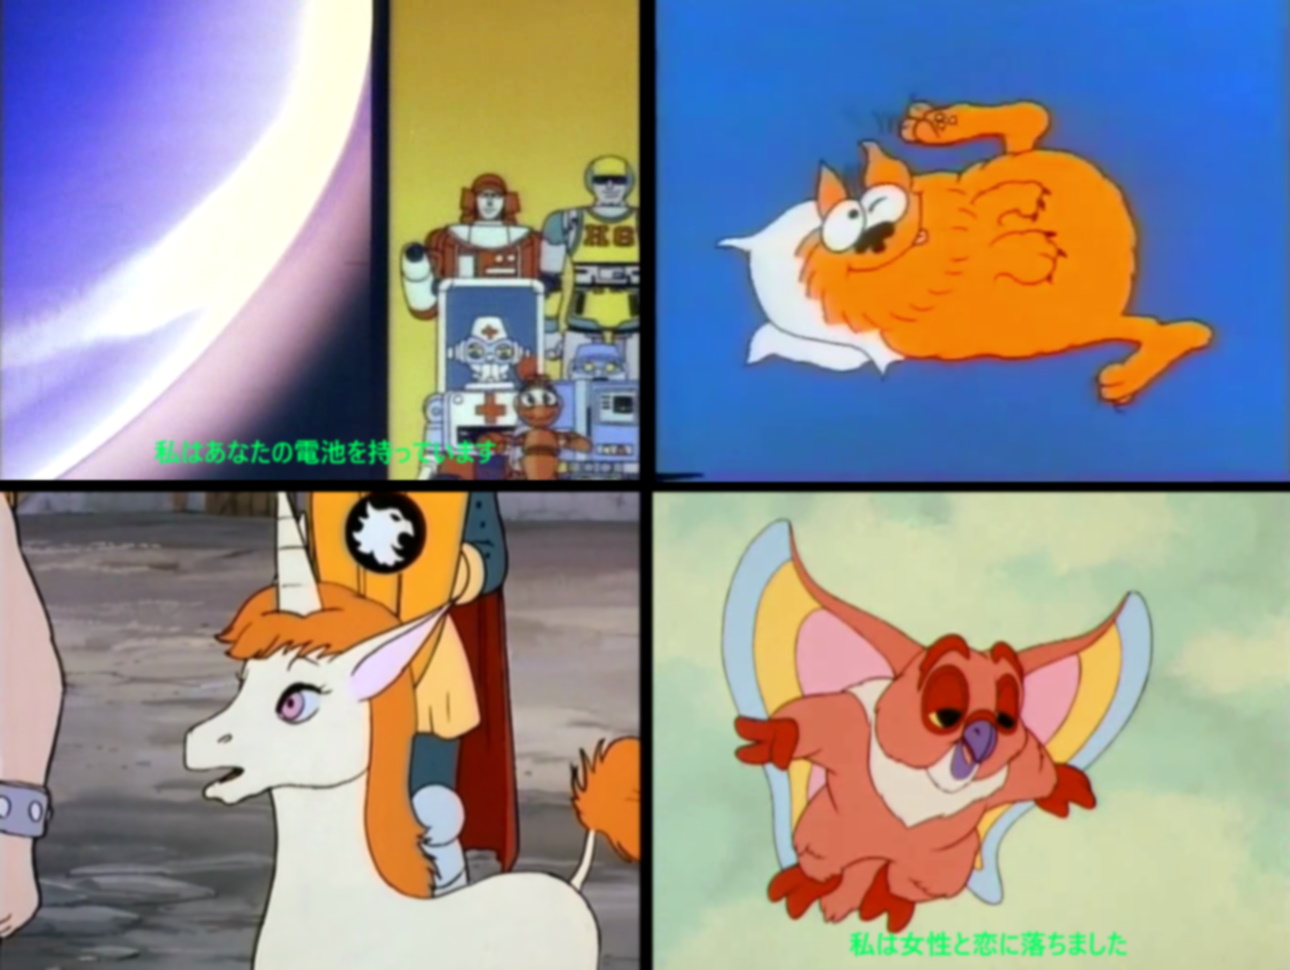 Framegrabs from four 80s childrens television programmes showing: marching robots, a cat scratching its ear, a unicorn with a knight's shield behind it, and a pastel-coloured creature using its huge ears to fly.